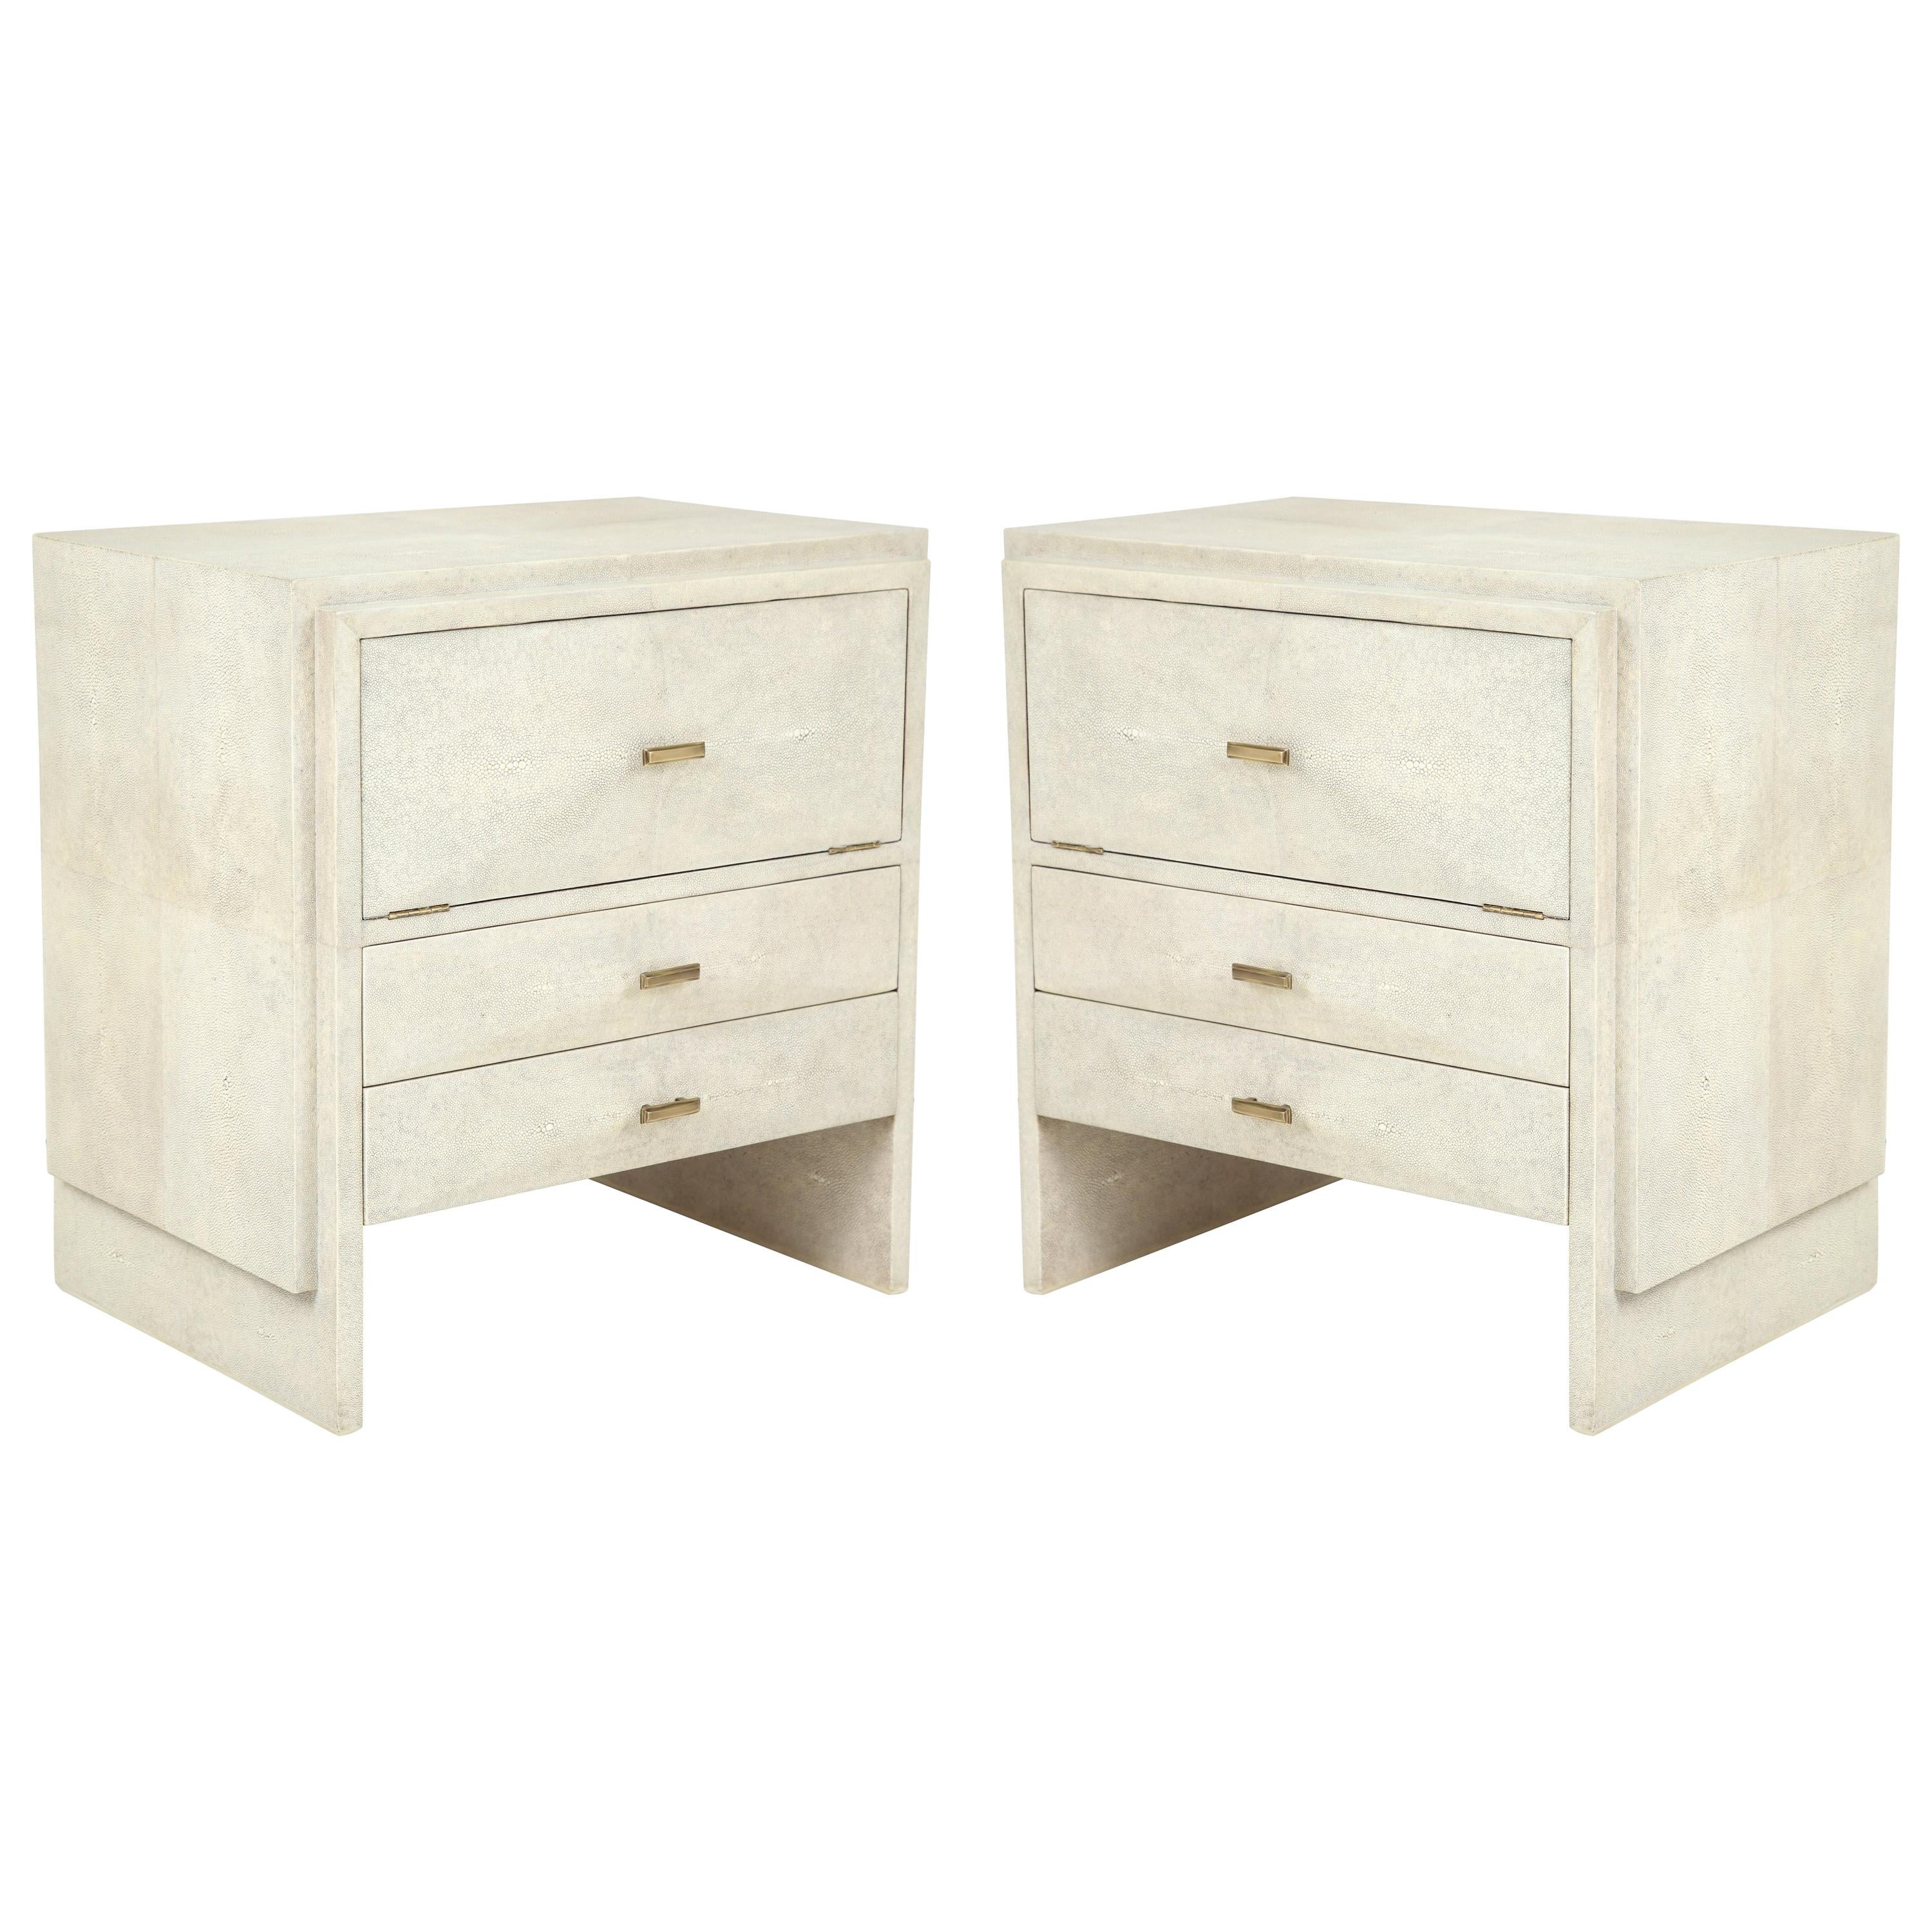 Shagreen Side Tables or Nightstands, Cream Colored Shagreen, France